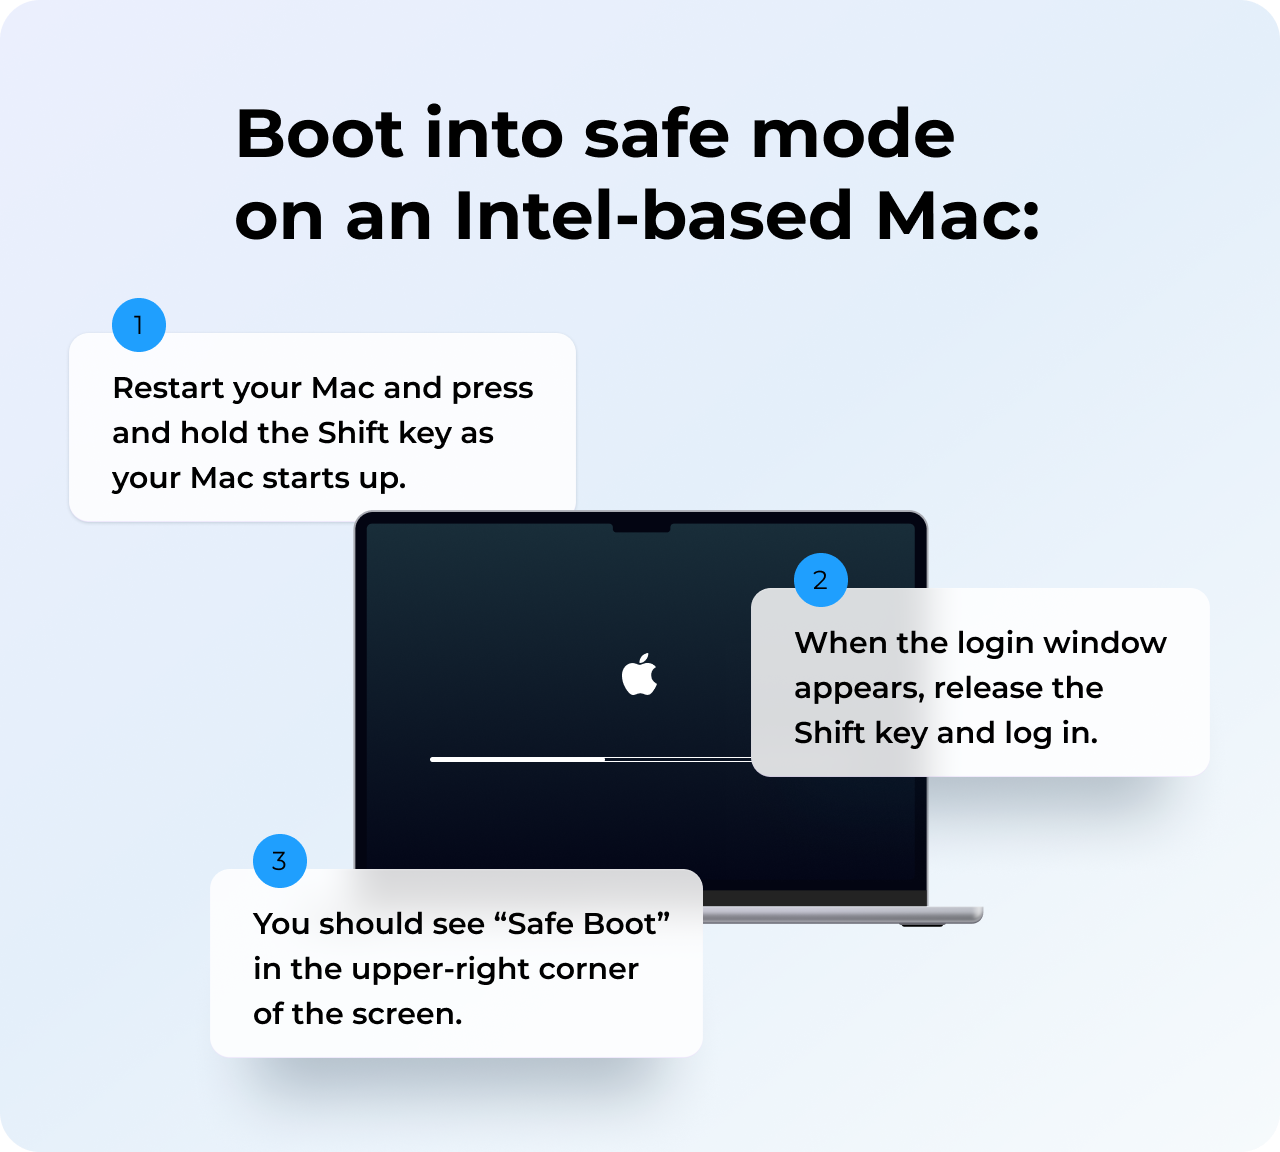 Macs with ProMotion displays get Firefox performance boost